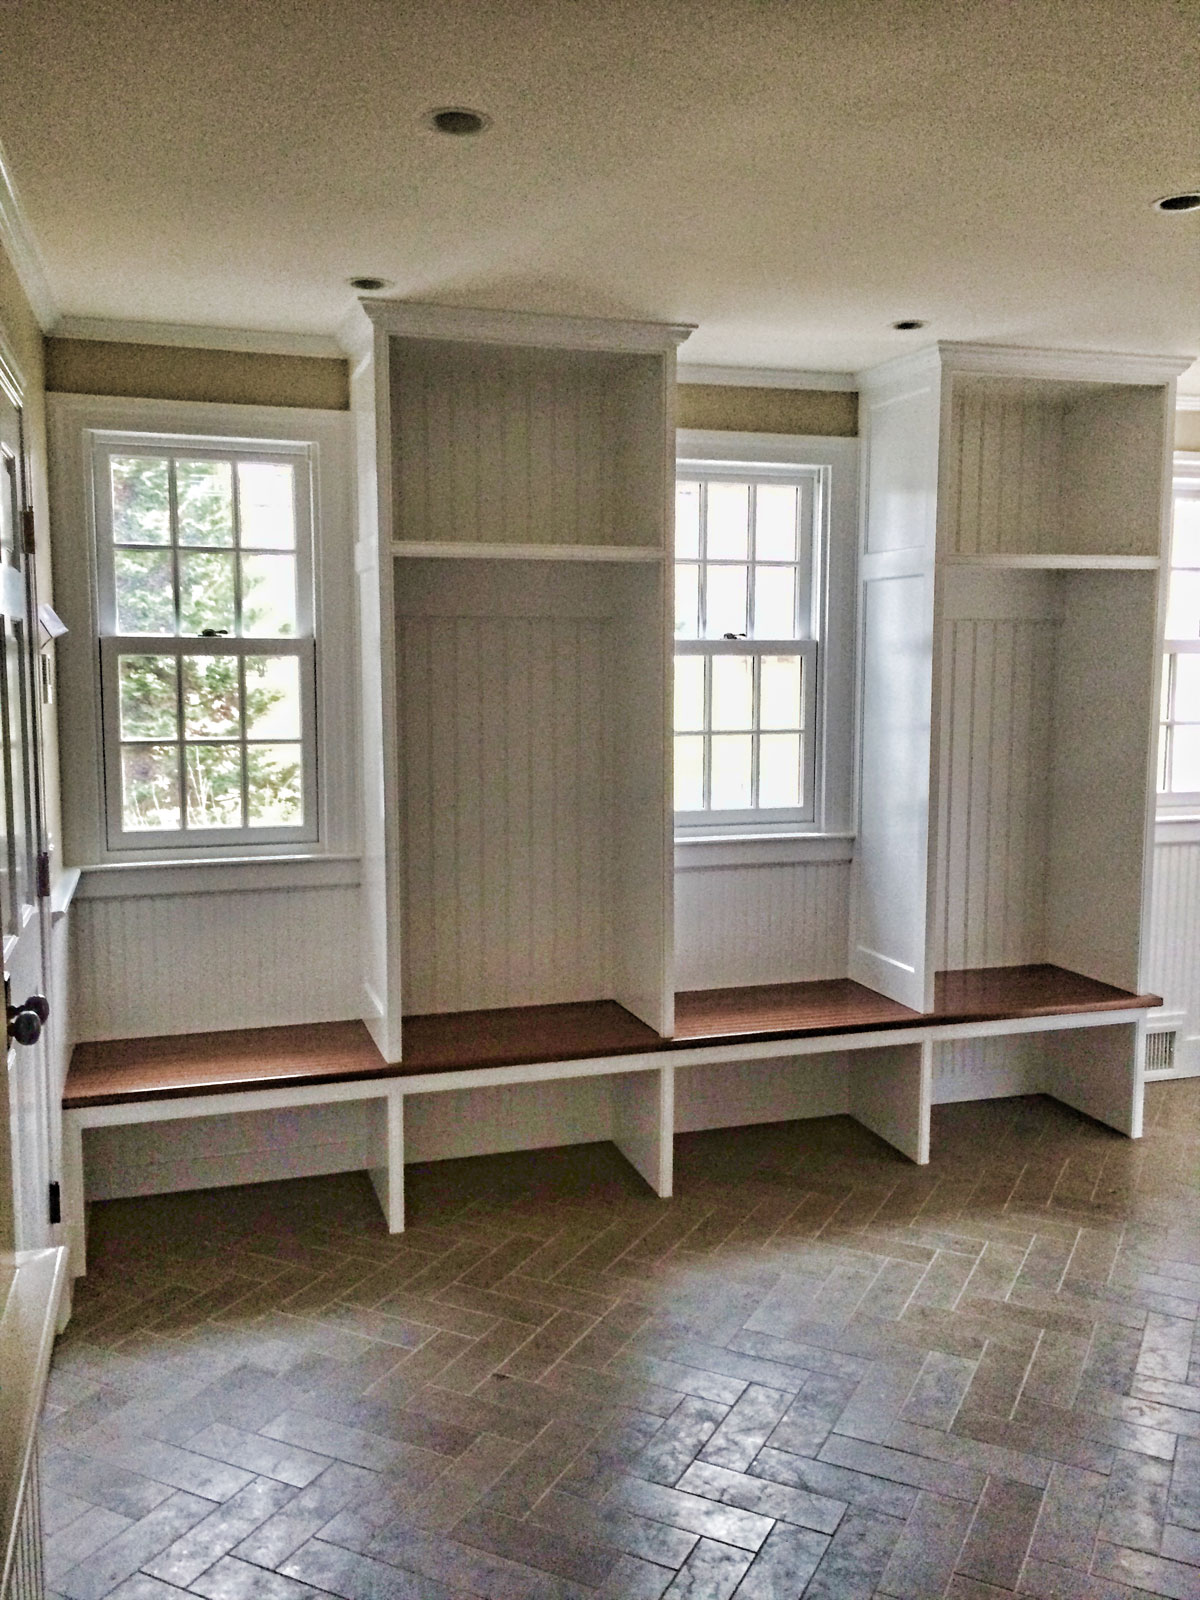 carpenter-construction-home-builder-newtown-ct-built-in-cabinetry-1-web